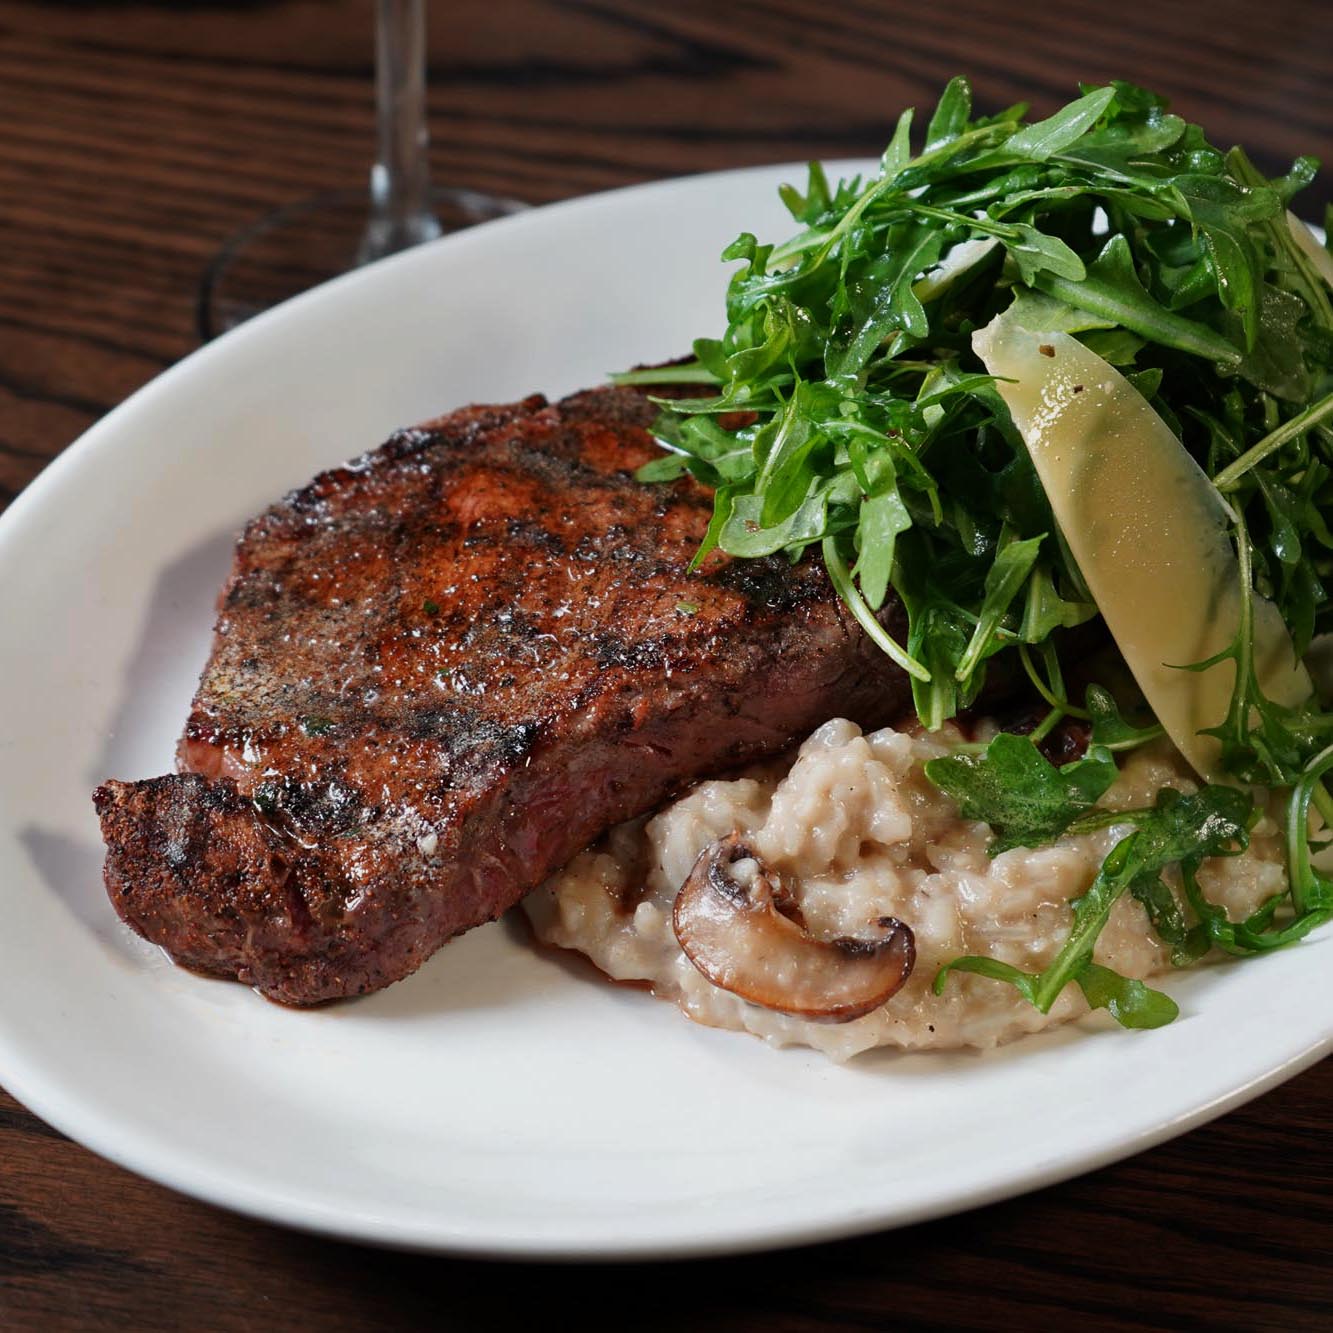 A Wagyu New York Strip steak plated with mushroom risotto and arugula salad.